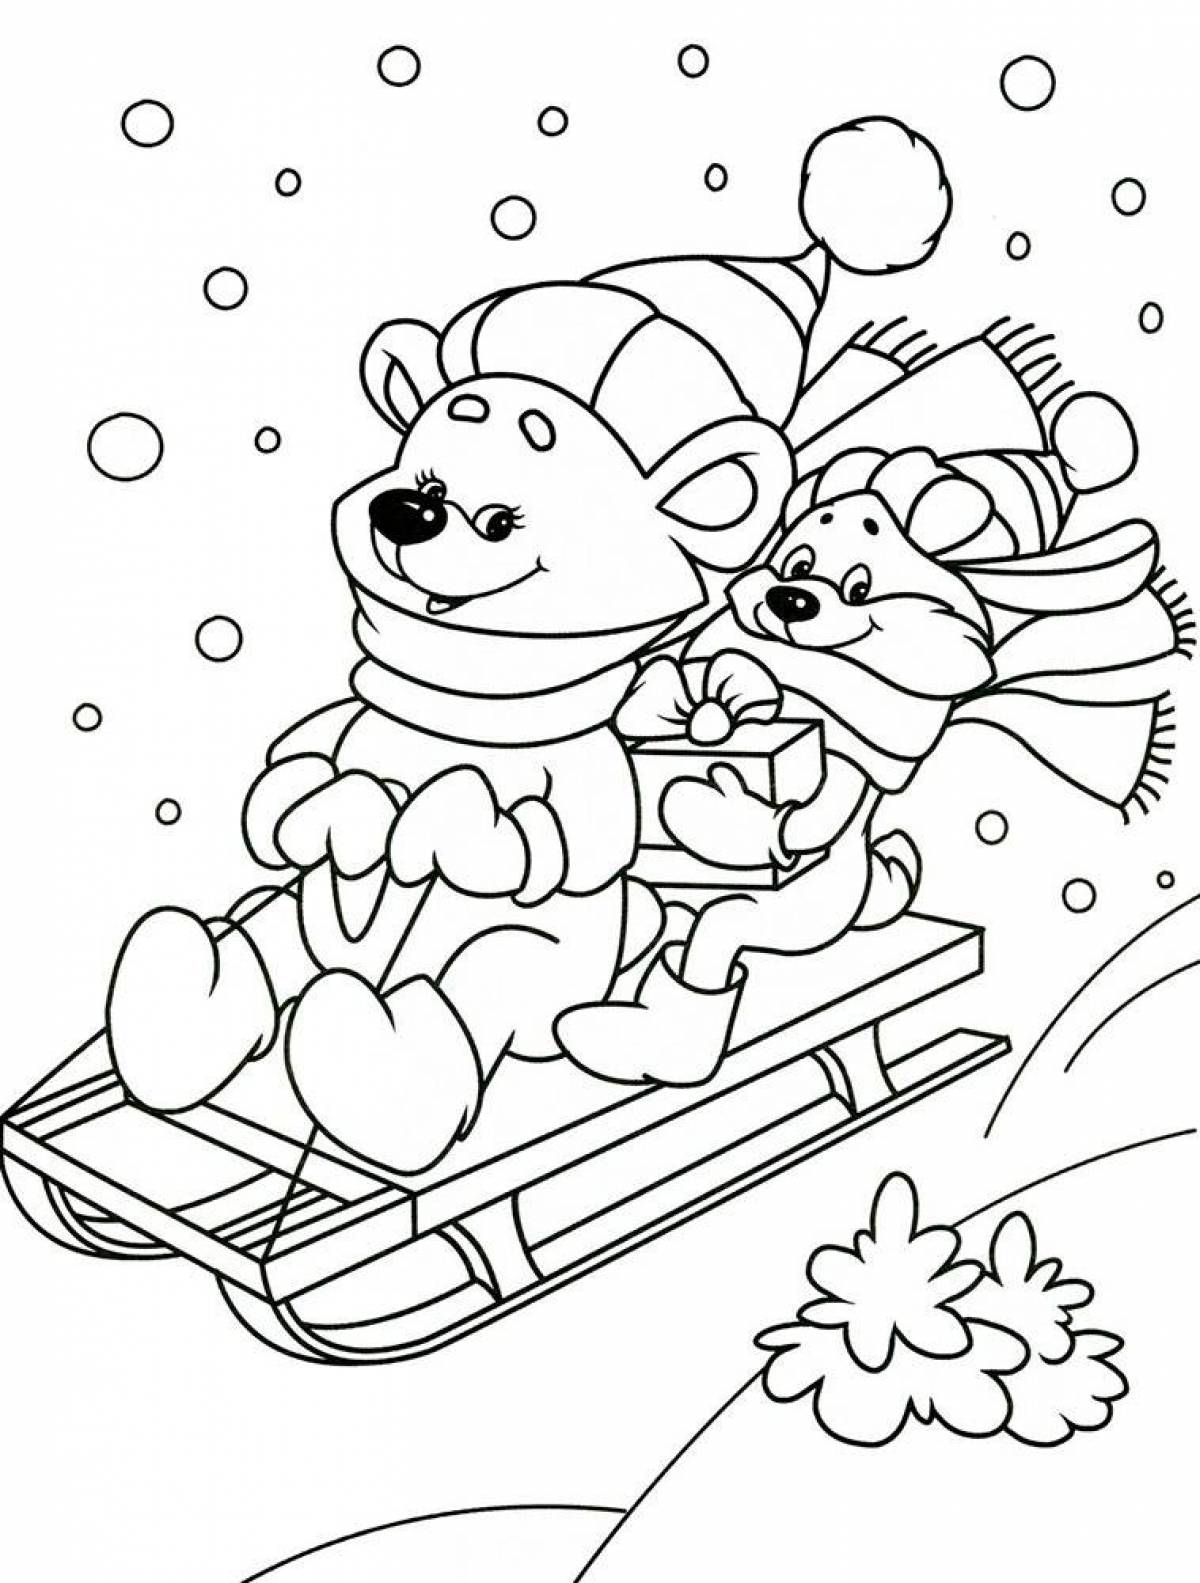 Fun coloring book winter for children 4-5 years old